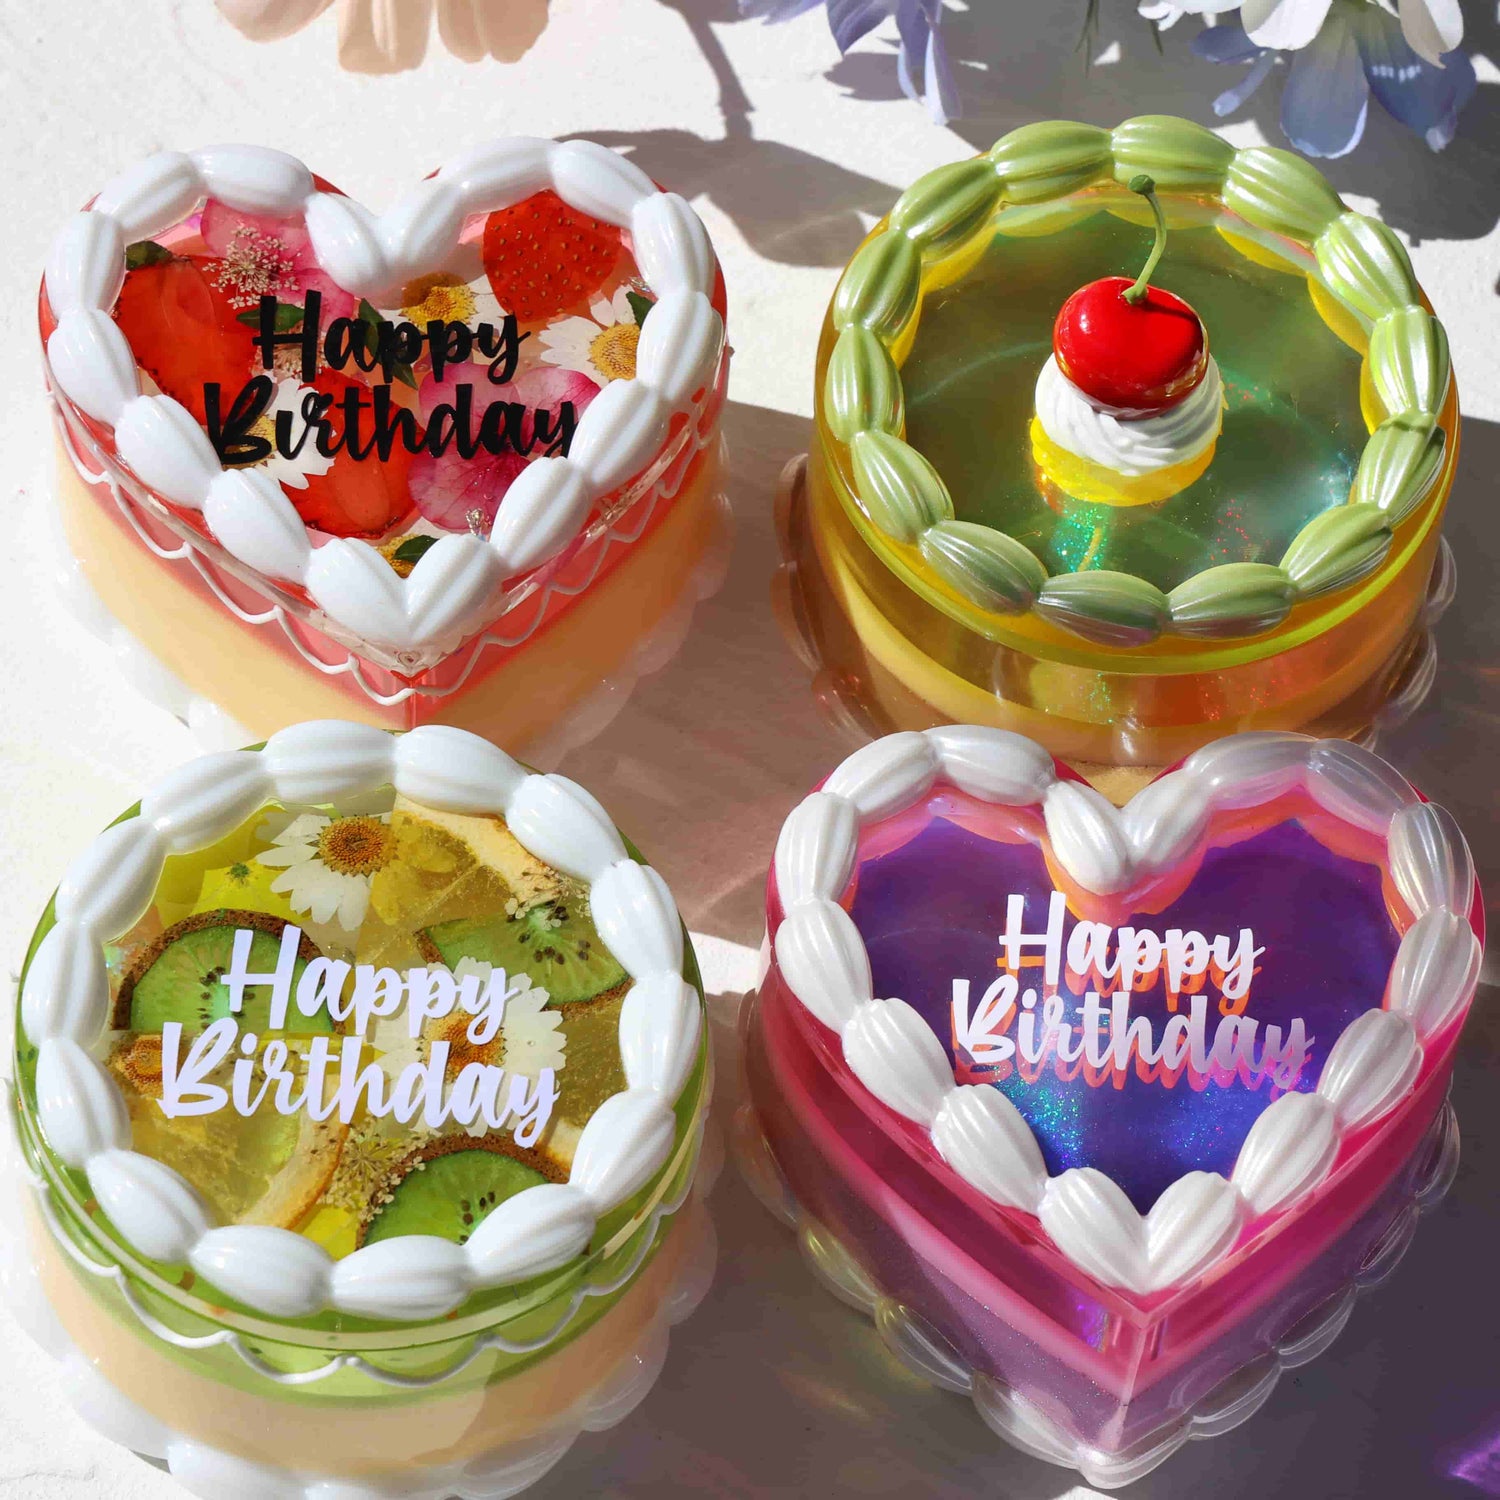 Rounded Cake Jar Resin Mold